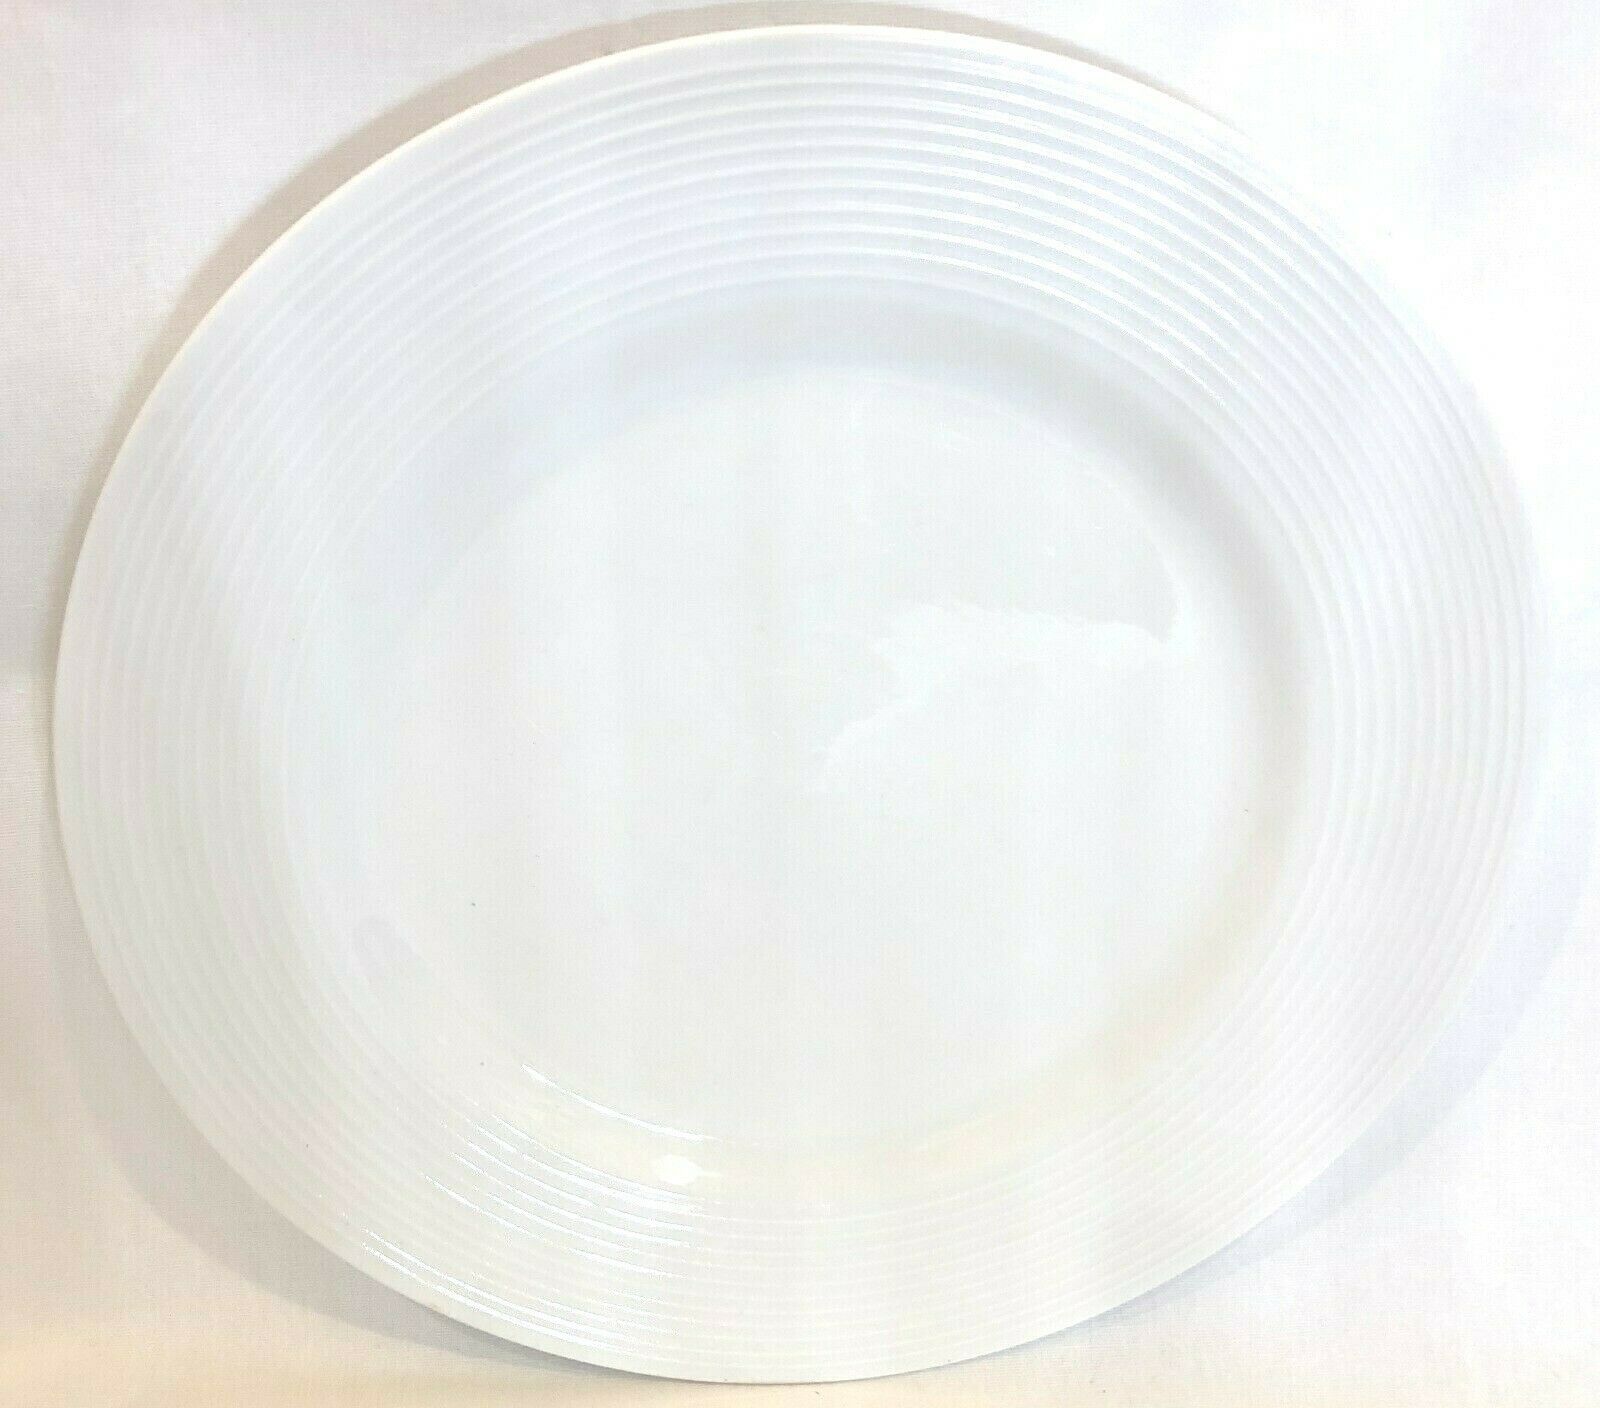 Gibson Home Designs "WALL STREET" Dinnerware Collection (Embossed) - $4.95 - $29.70